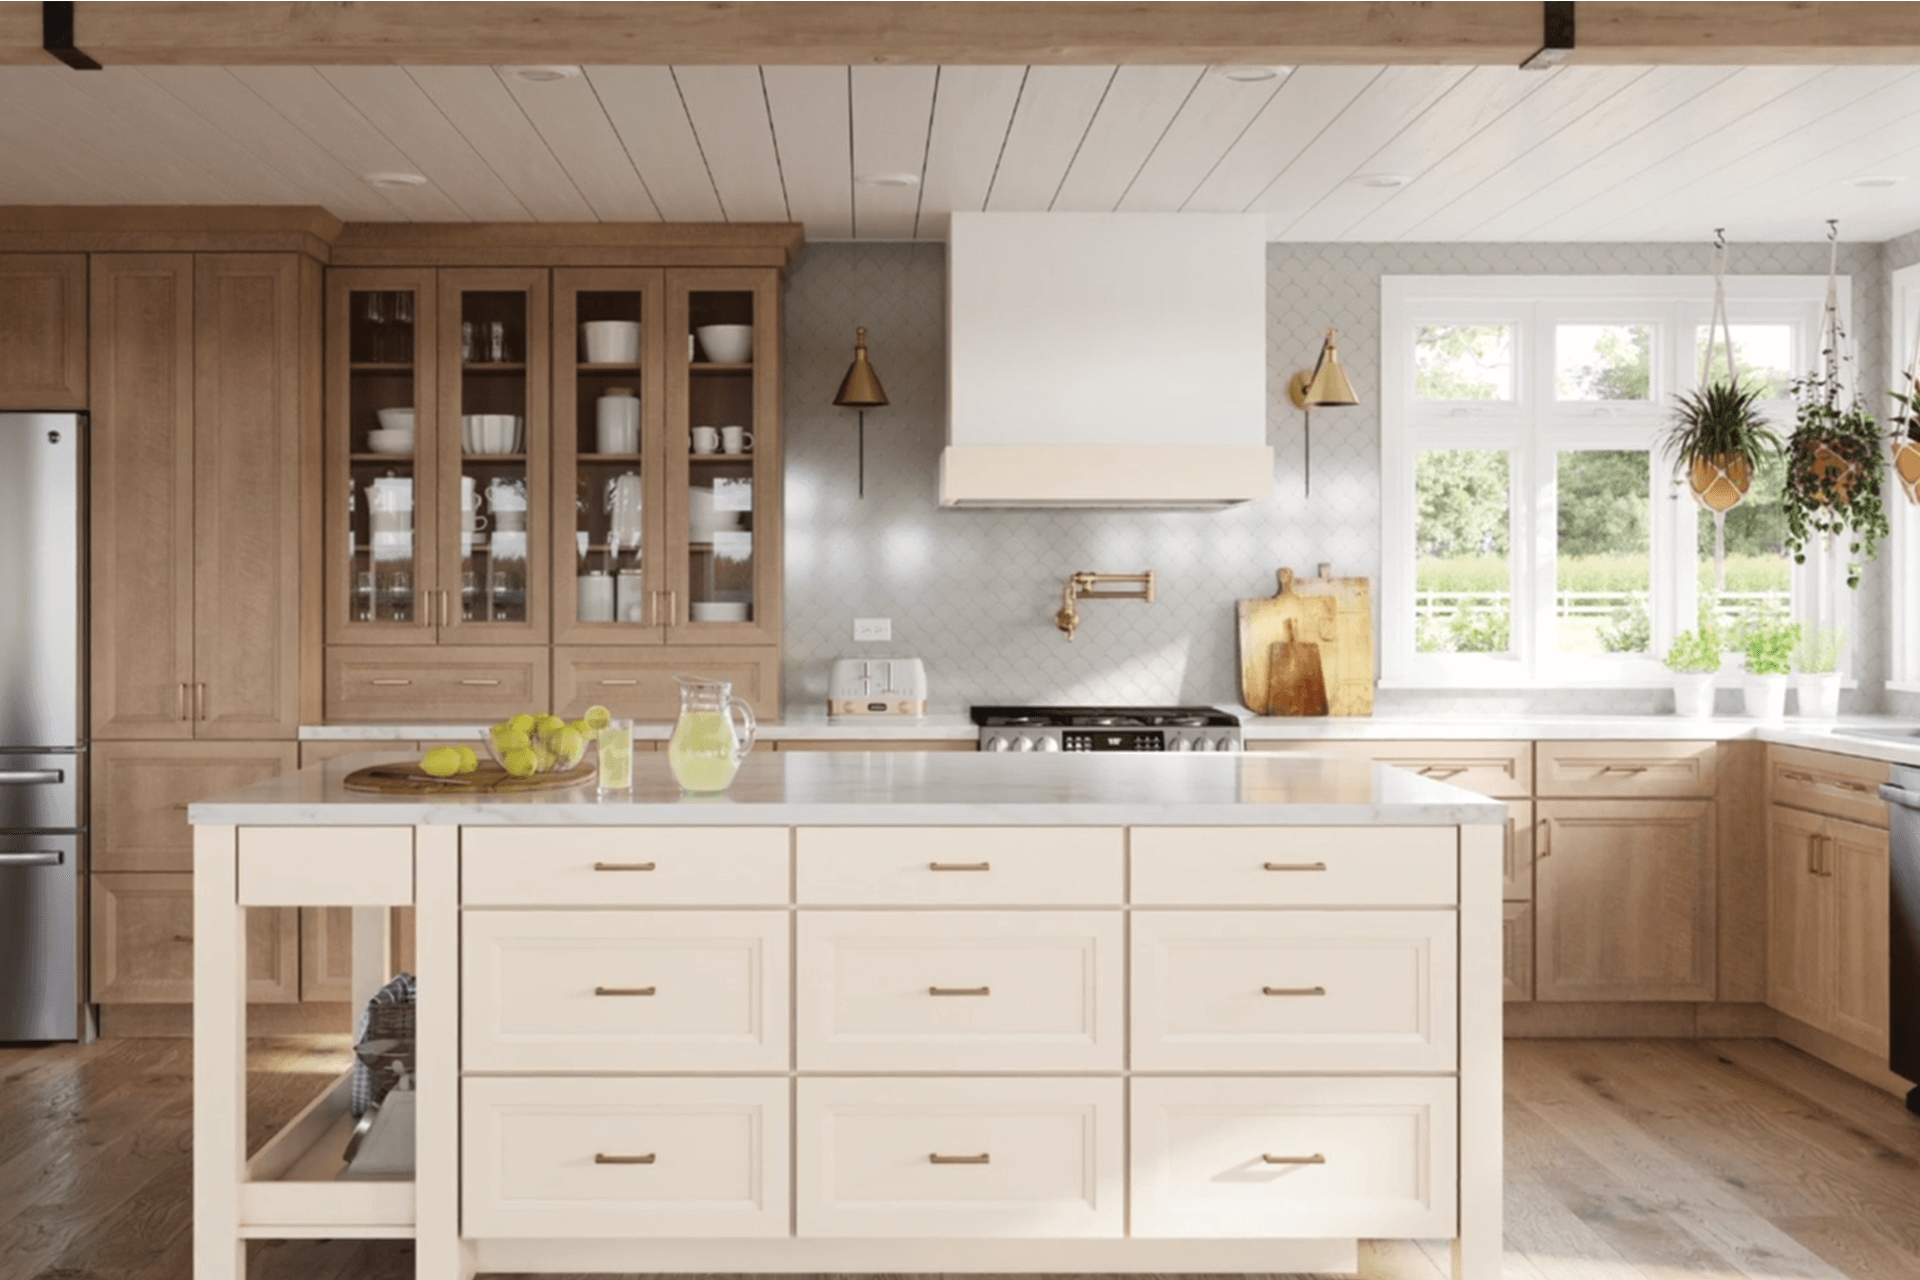 Kitchen design & color trends for 2023 and 2024 showing new kitchen cabinets and countertop, available from Lumberjack's Kitchen and Baths, serving Cleveland, Akron, Canton and all of northeast Ohio in new kitchen design, kitchen updates and kitchen cabinetry.